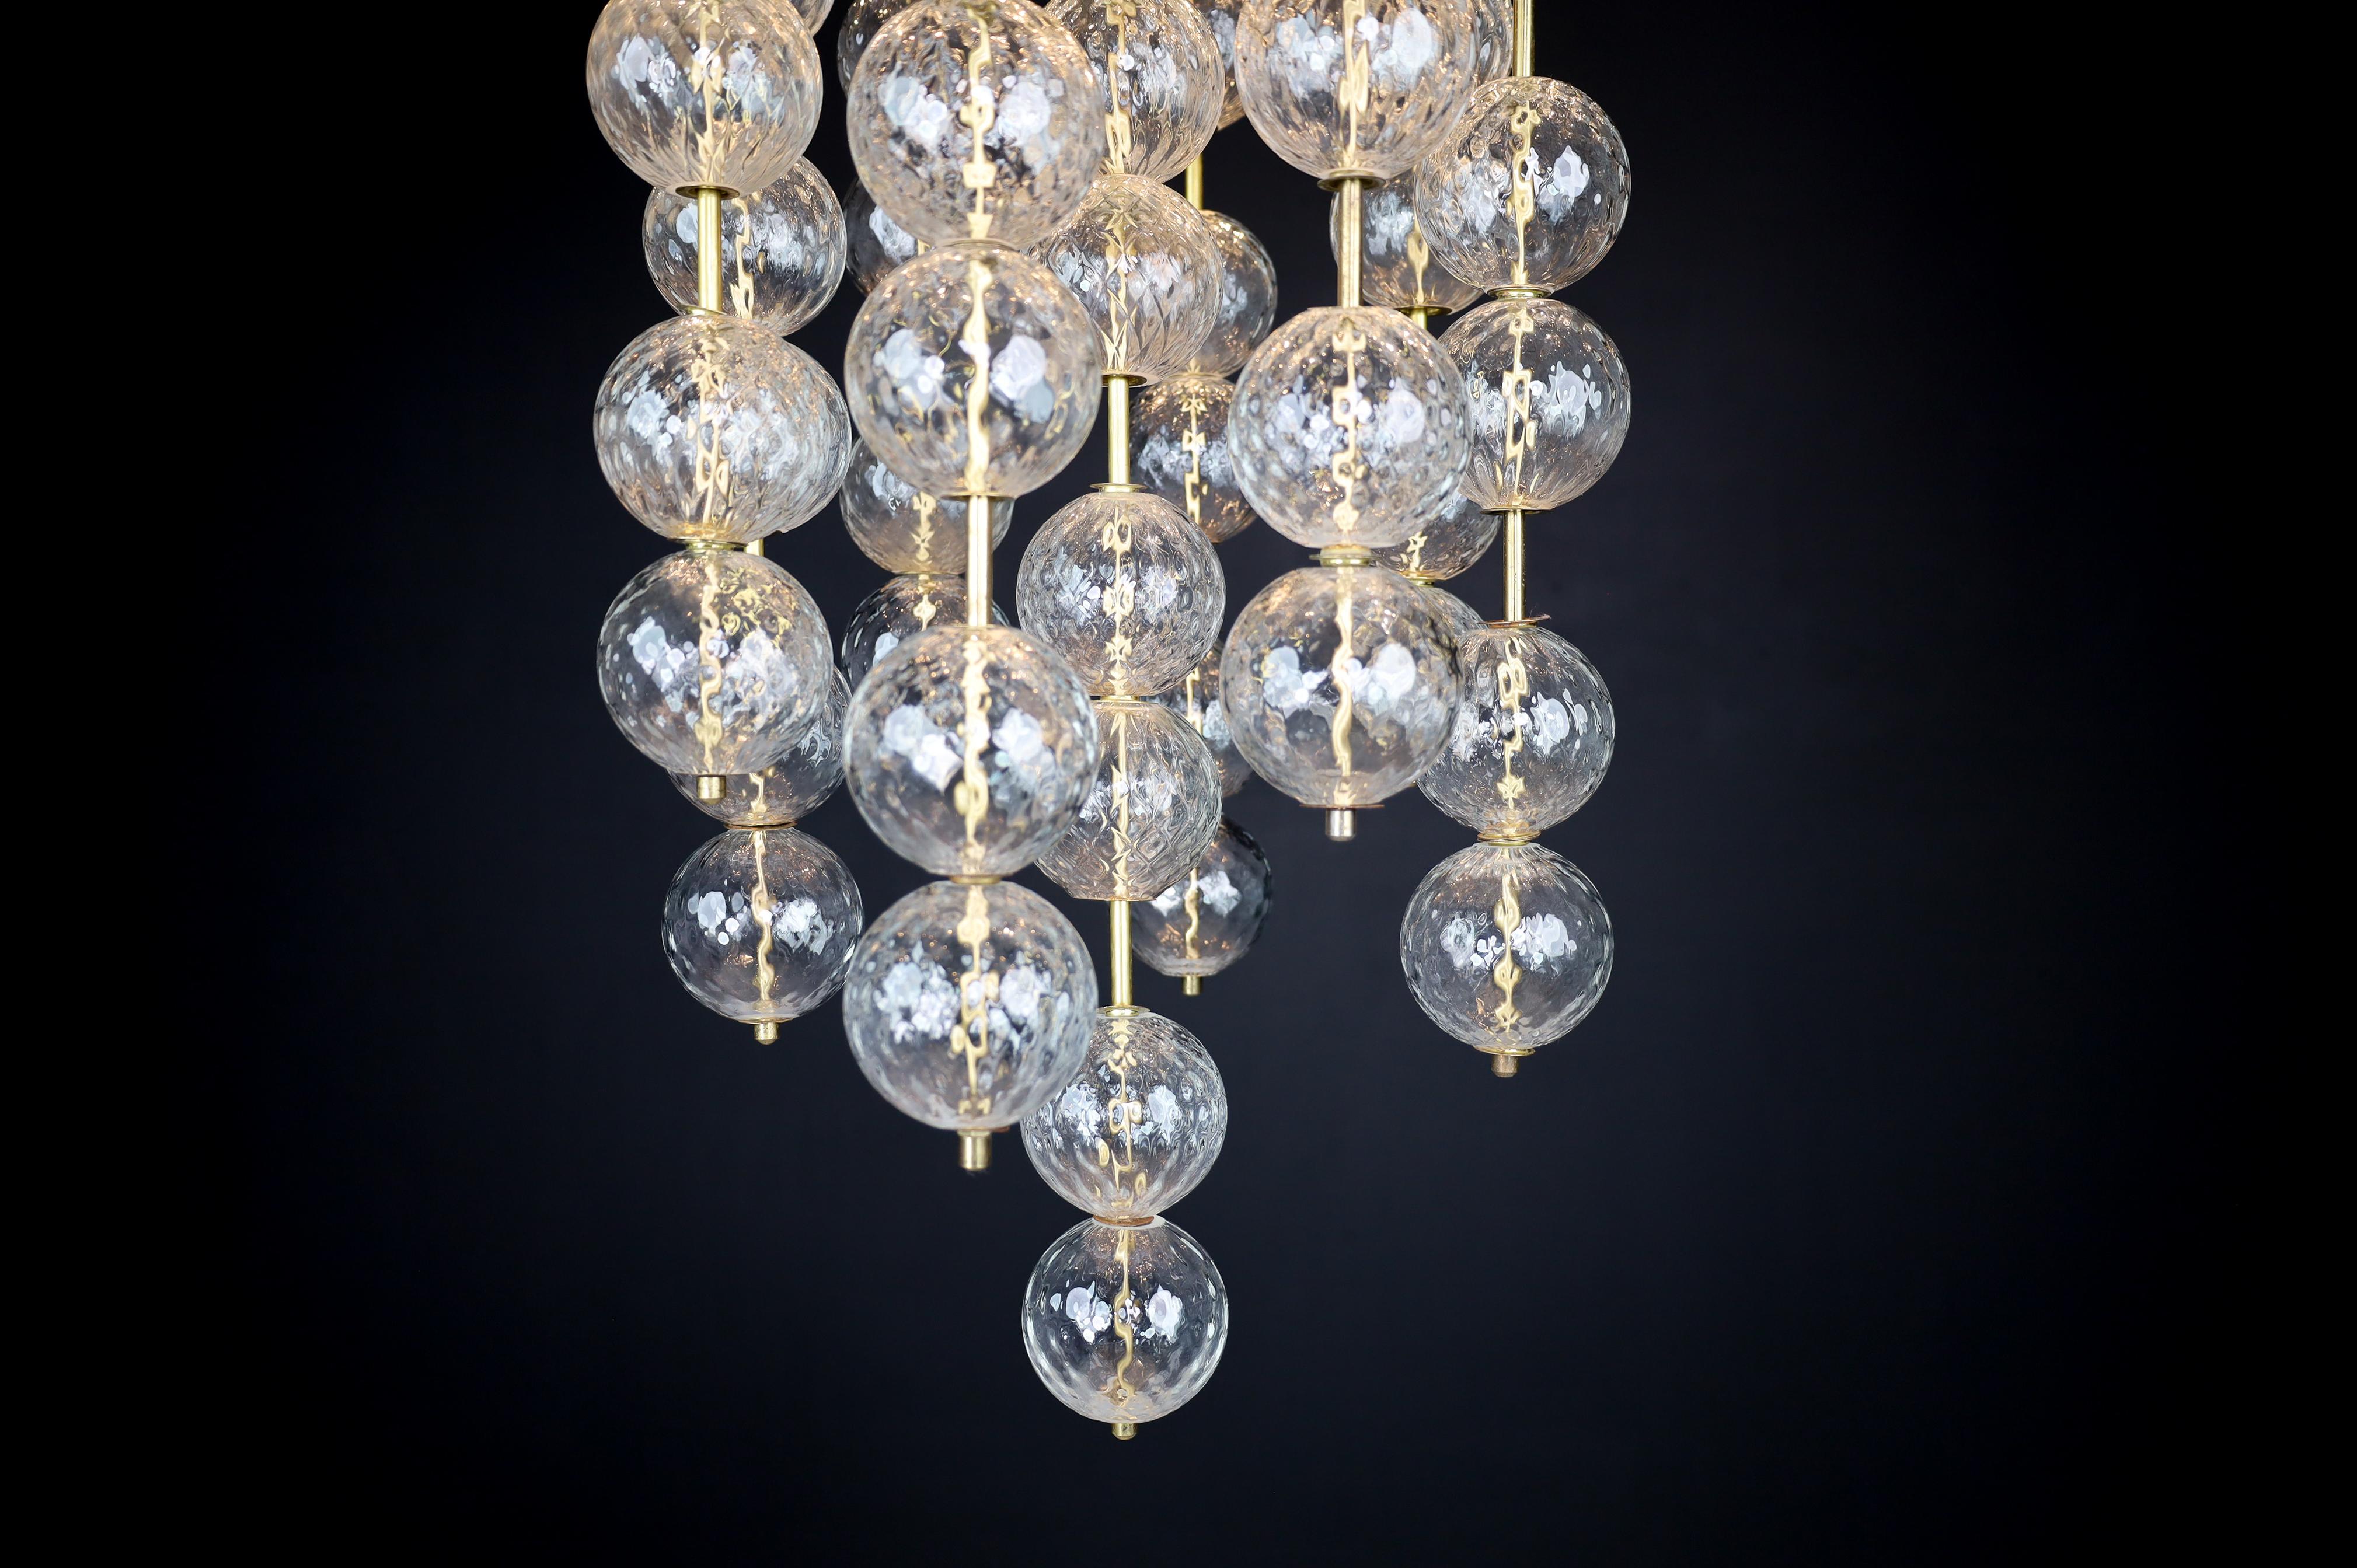 Grand Chandelier with Brass Fixture and Hand-blowed Glass Globes, 1960s For Sale 9